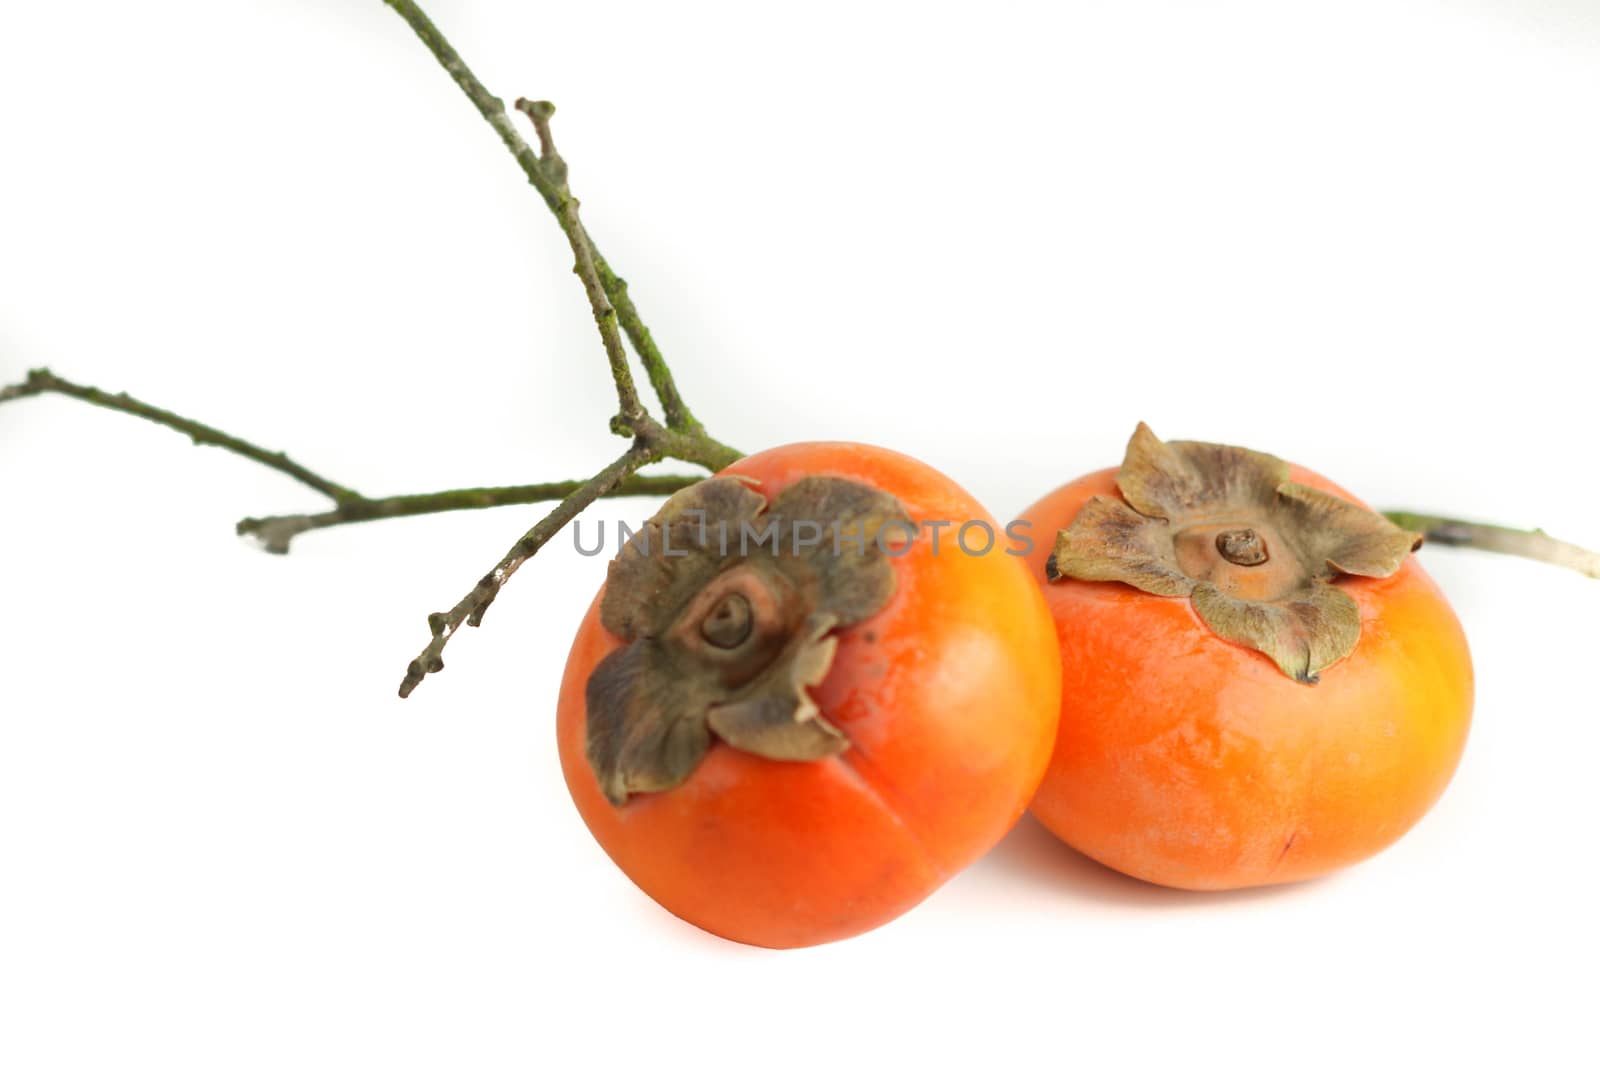 Two persimmon with a stick on white background.